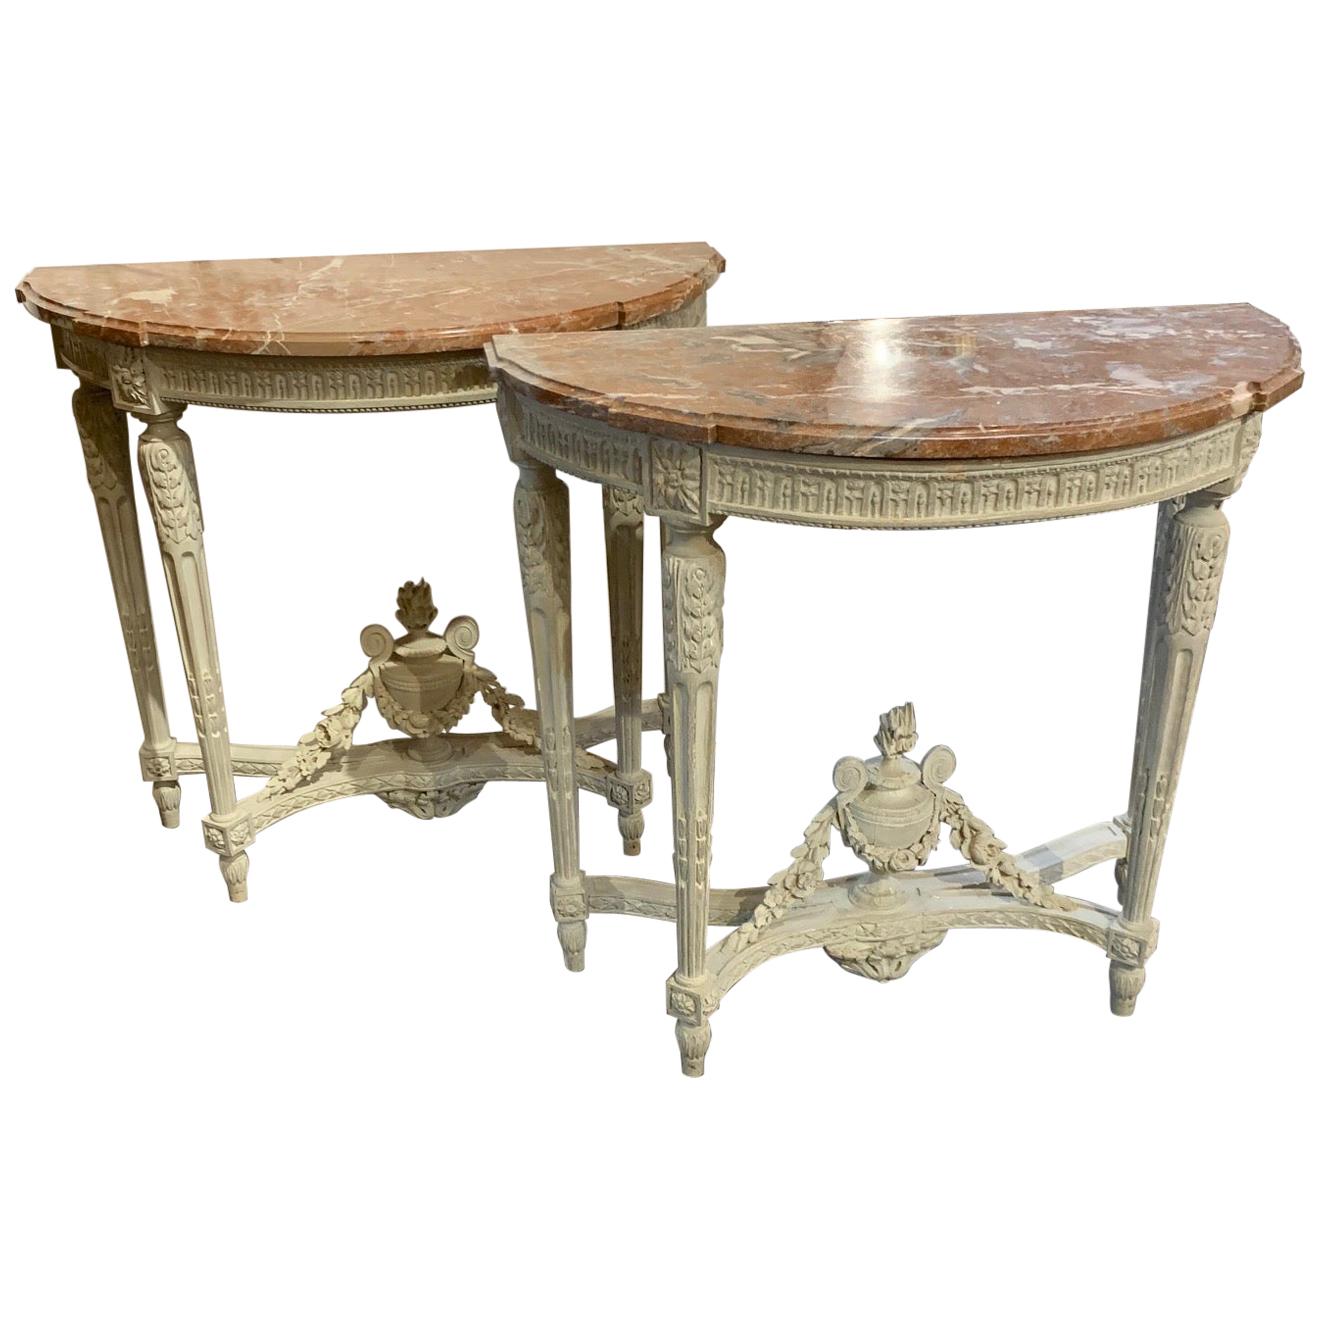 Pair of 18th Century French Louis XVI Style Carved and Painted Consoles